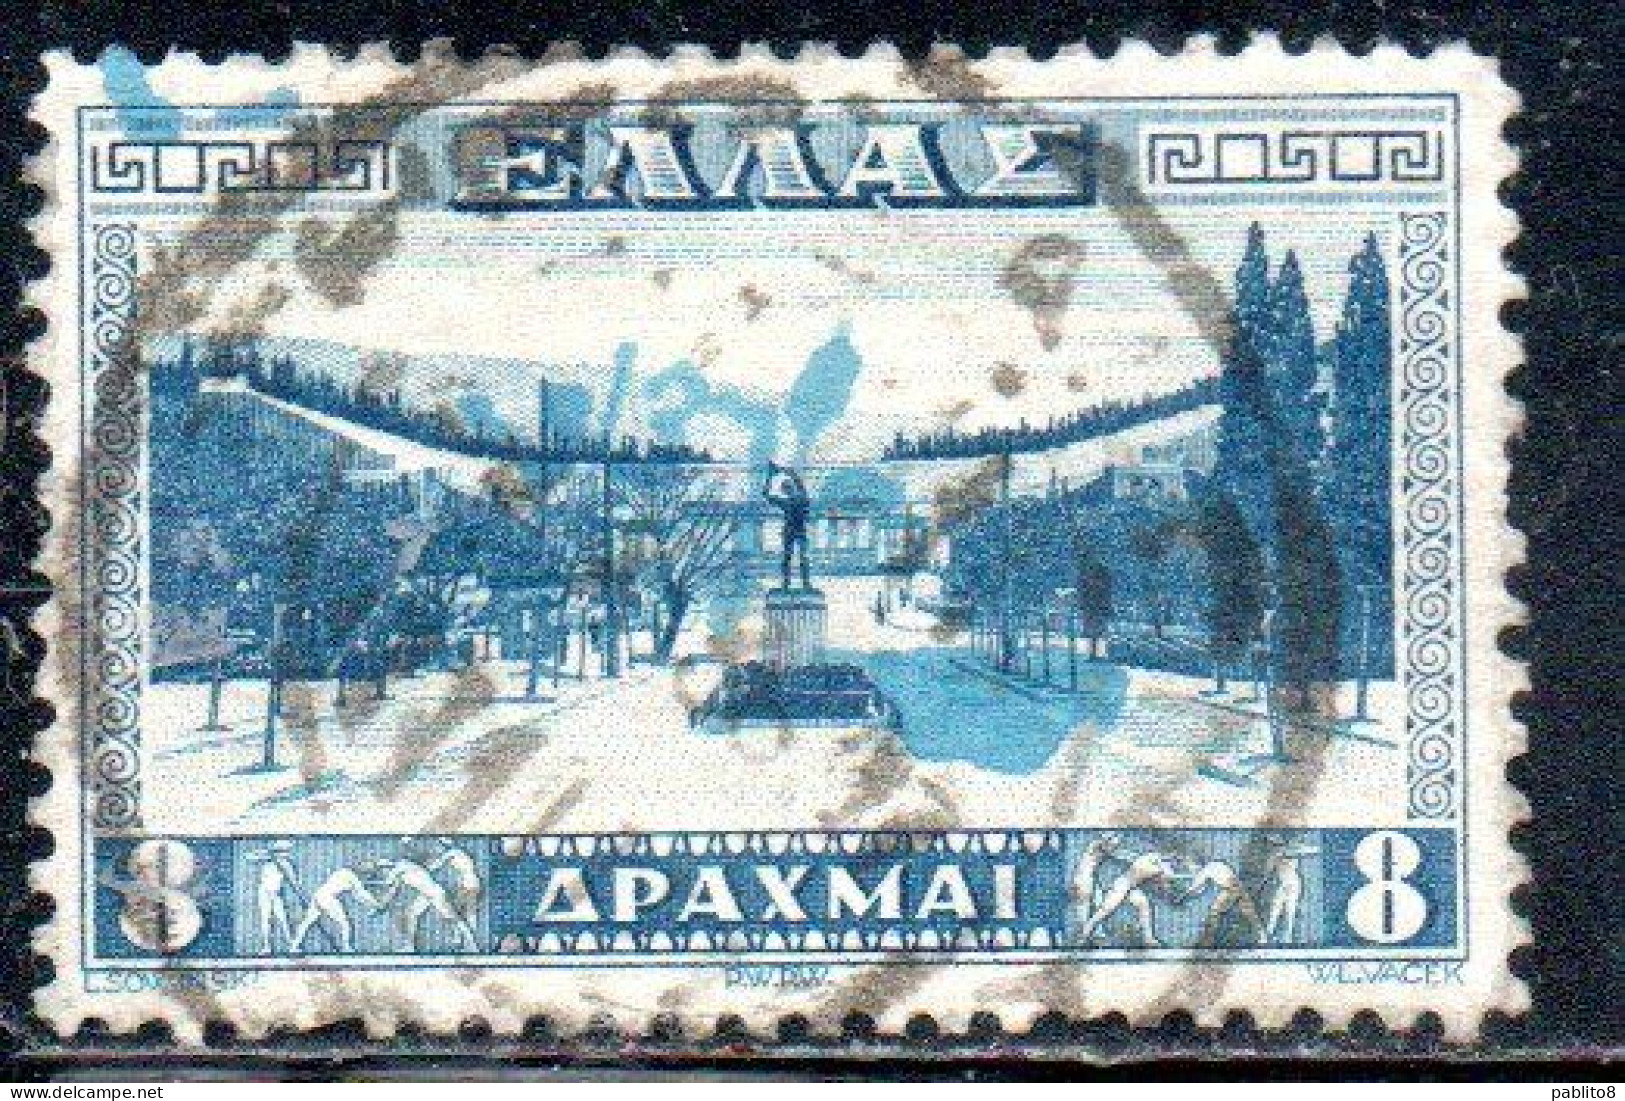 GREECE GRECIA HELLAS 1934 APPROACH TO ATHENS STADIUM 8d USED USATO OBLITERE' - Usados